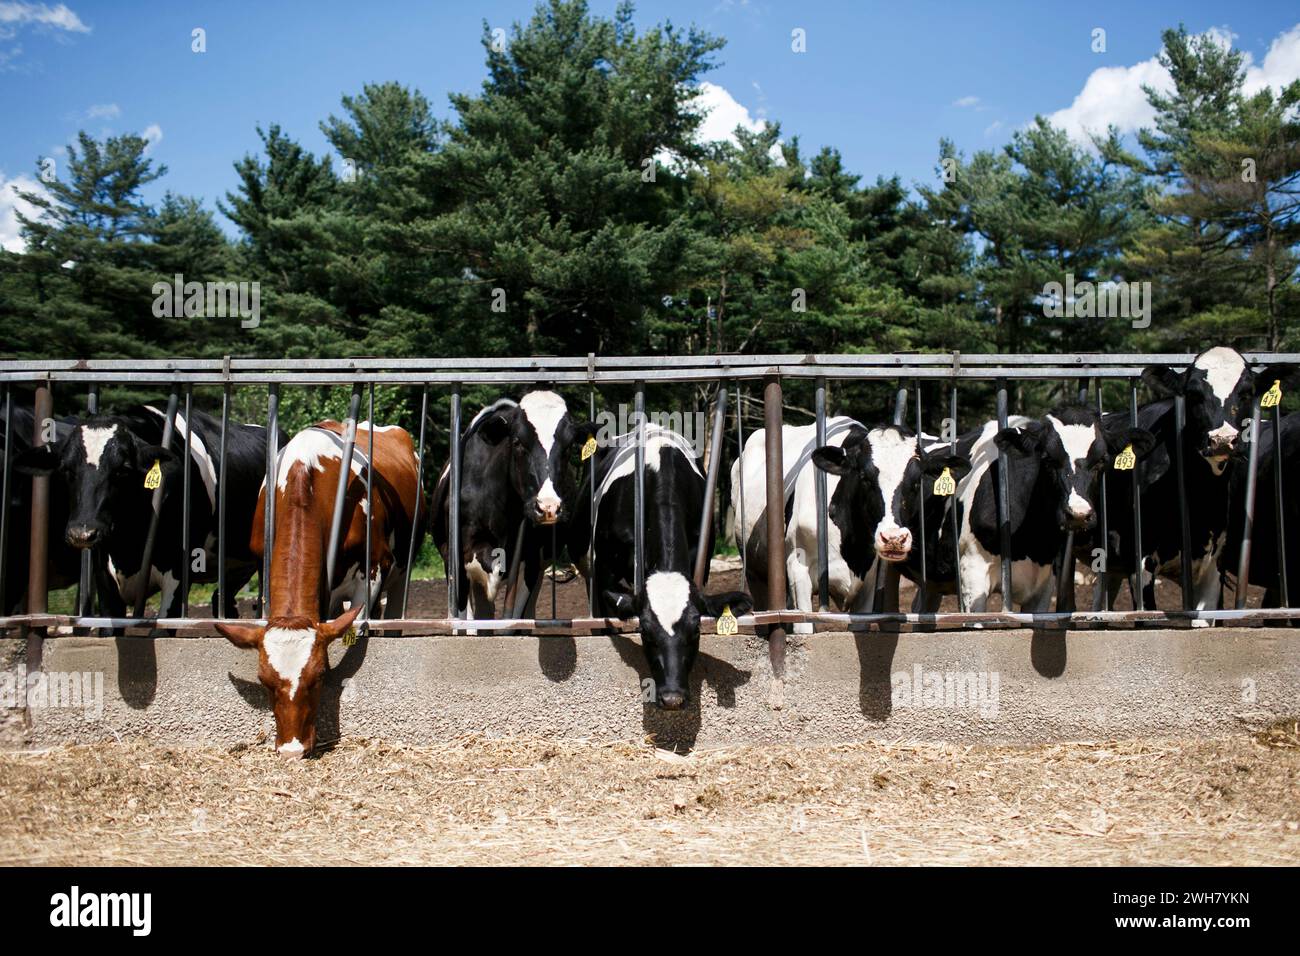 A herd of dairy cattle line up in a rack feeder to eat on working dairy farm in Massachusetts, USA. Stock Photo